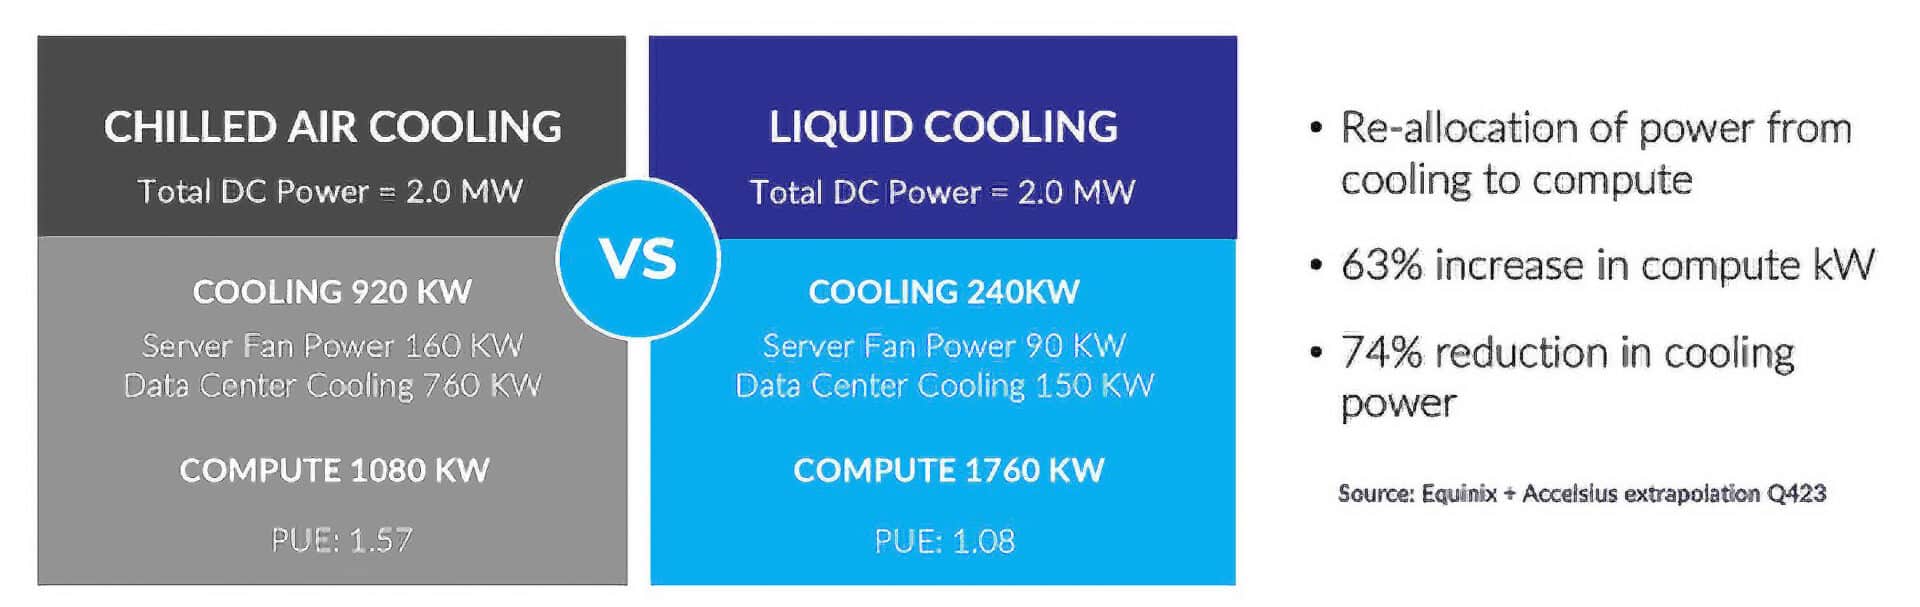 Chilled Air Cooling vs Liquid Cooling 1